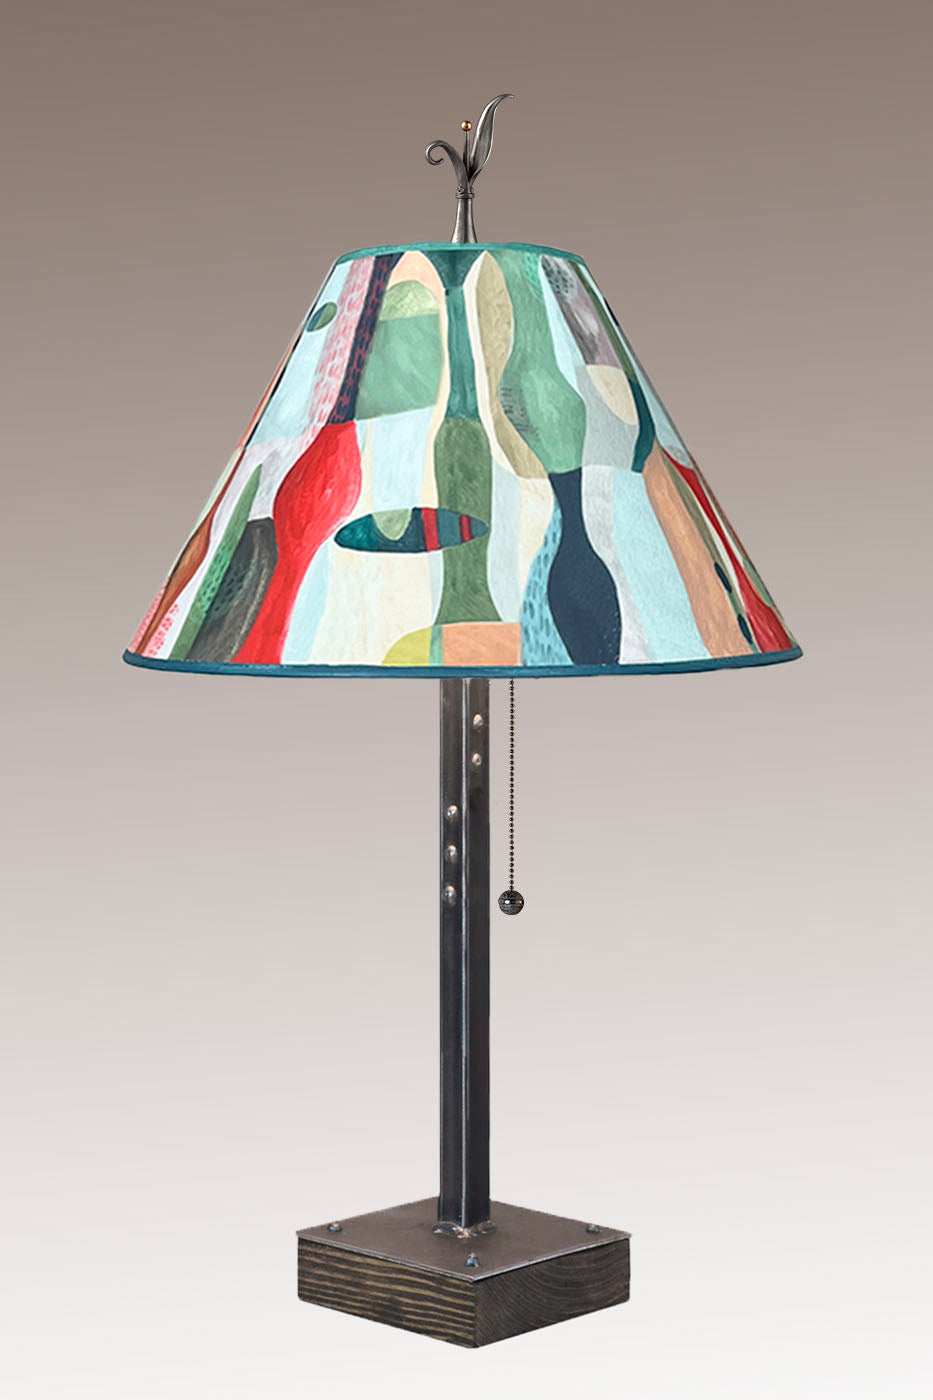 Janna Ugone & Co Table Lamp Steel Table Lamp on Wood with Medium Conical Shade in Riviera in Poppy